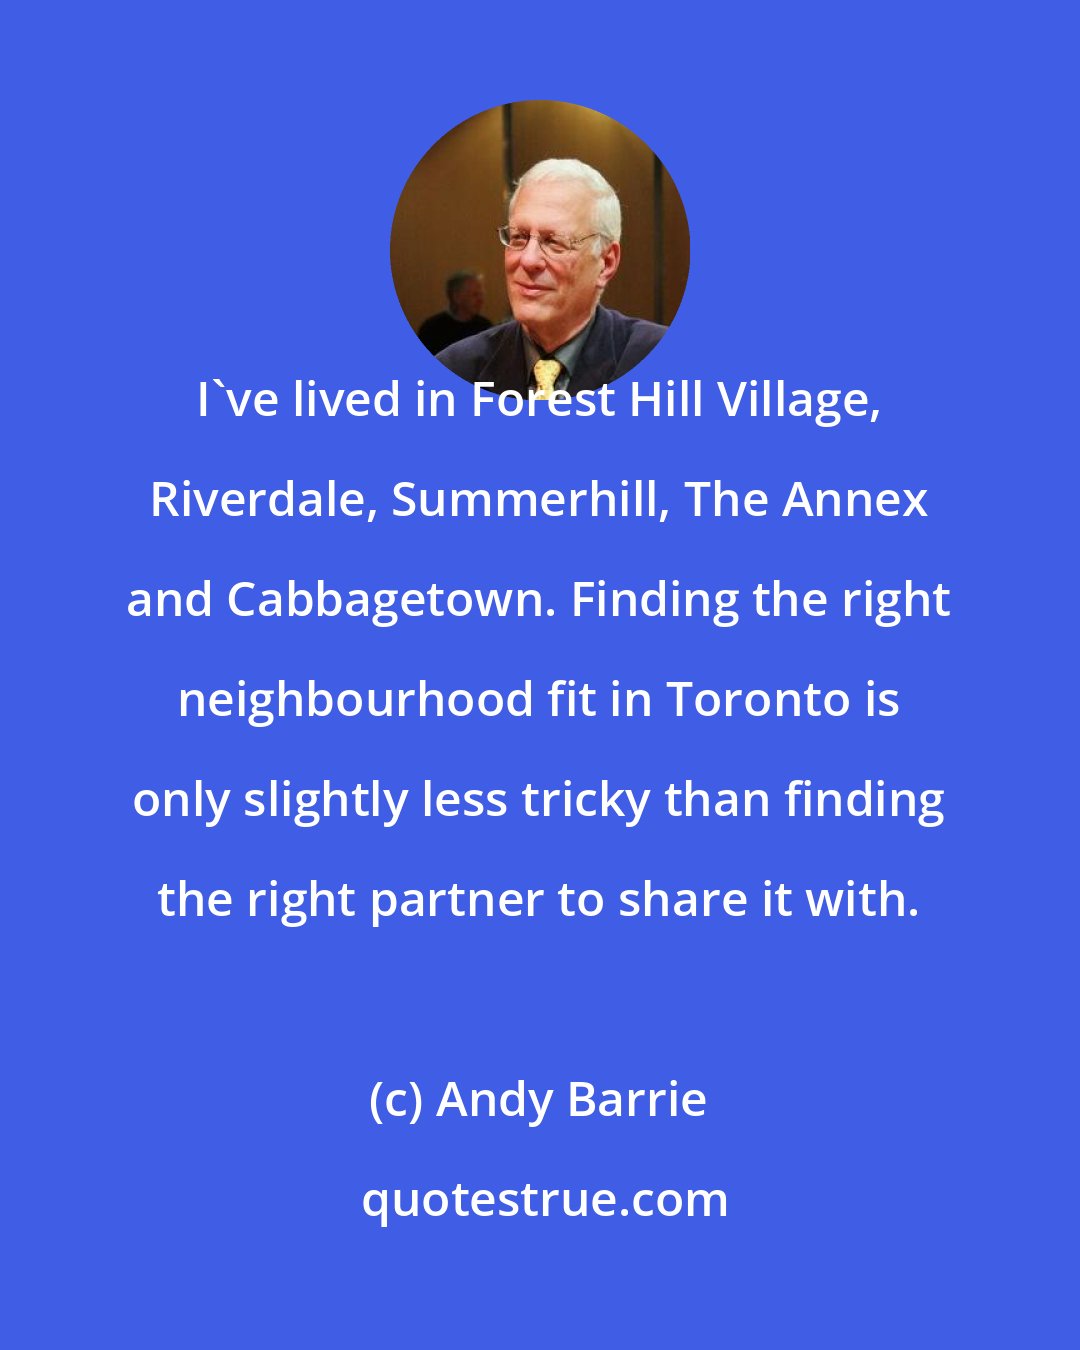 Andy Barrie: I've lived in Forest Hill Village, Riverdale, Summerhill, The Annex and Cabbagetown. Finding the right neighbourhood fit in Toronto is only slightly less tricky than finding the right partner to share it with.